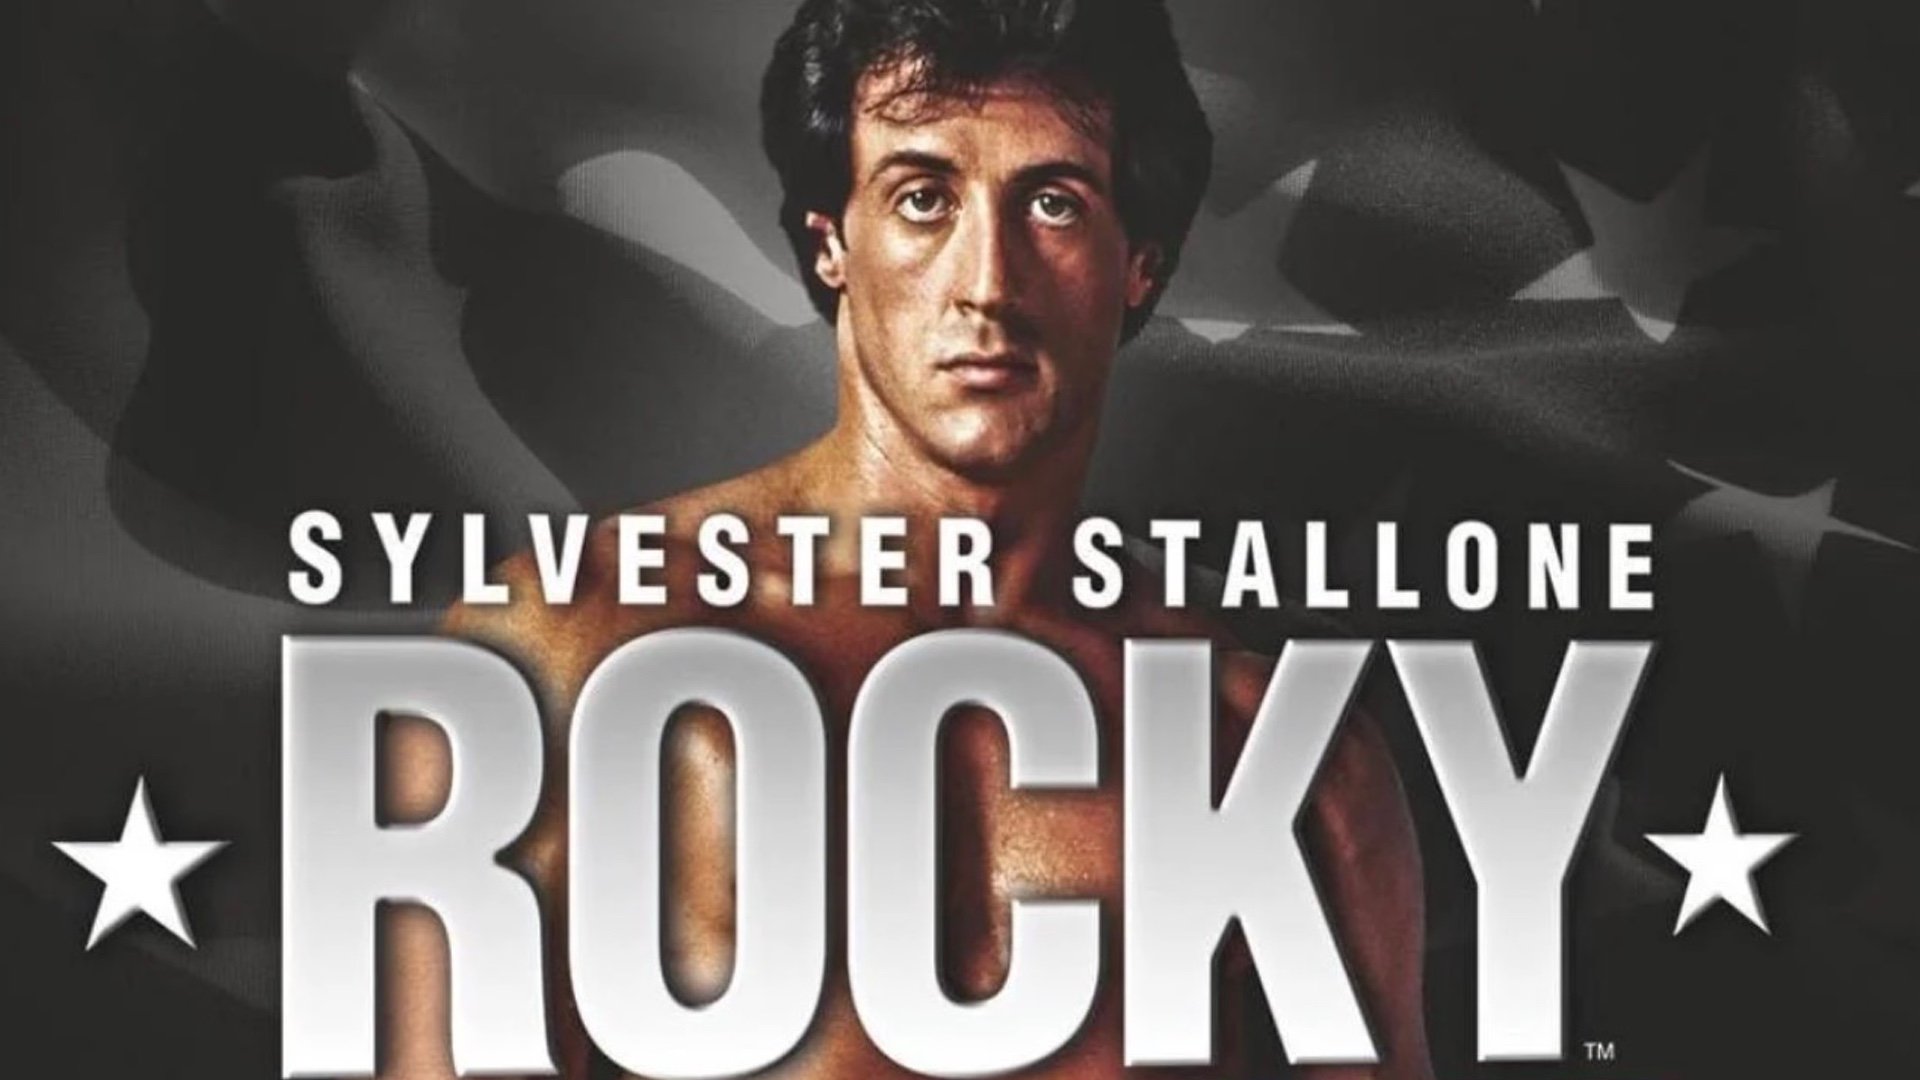 Sylvester Stallone's ROCKY Saga is Getting a Six Movie 4K Set